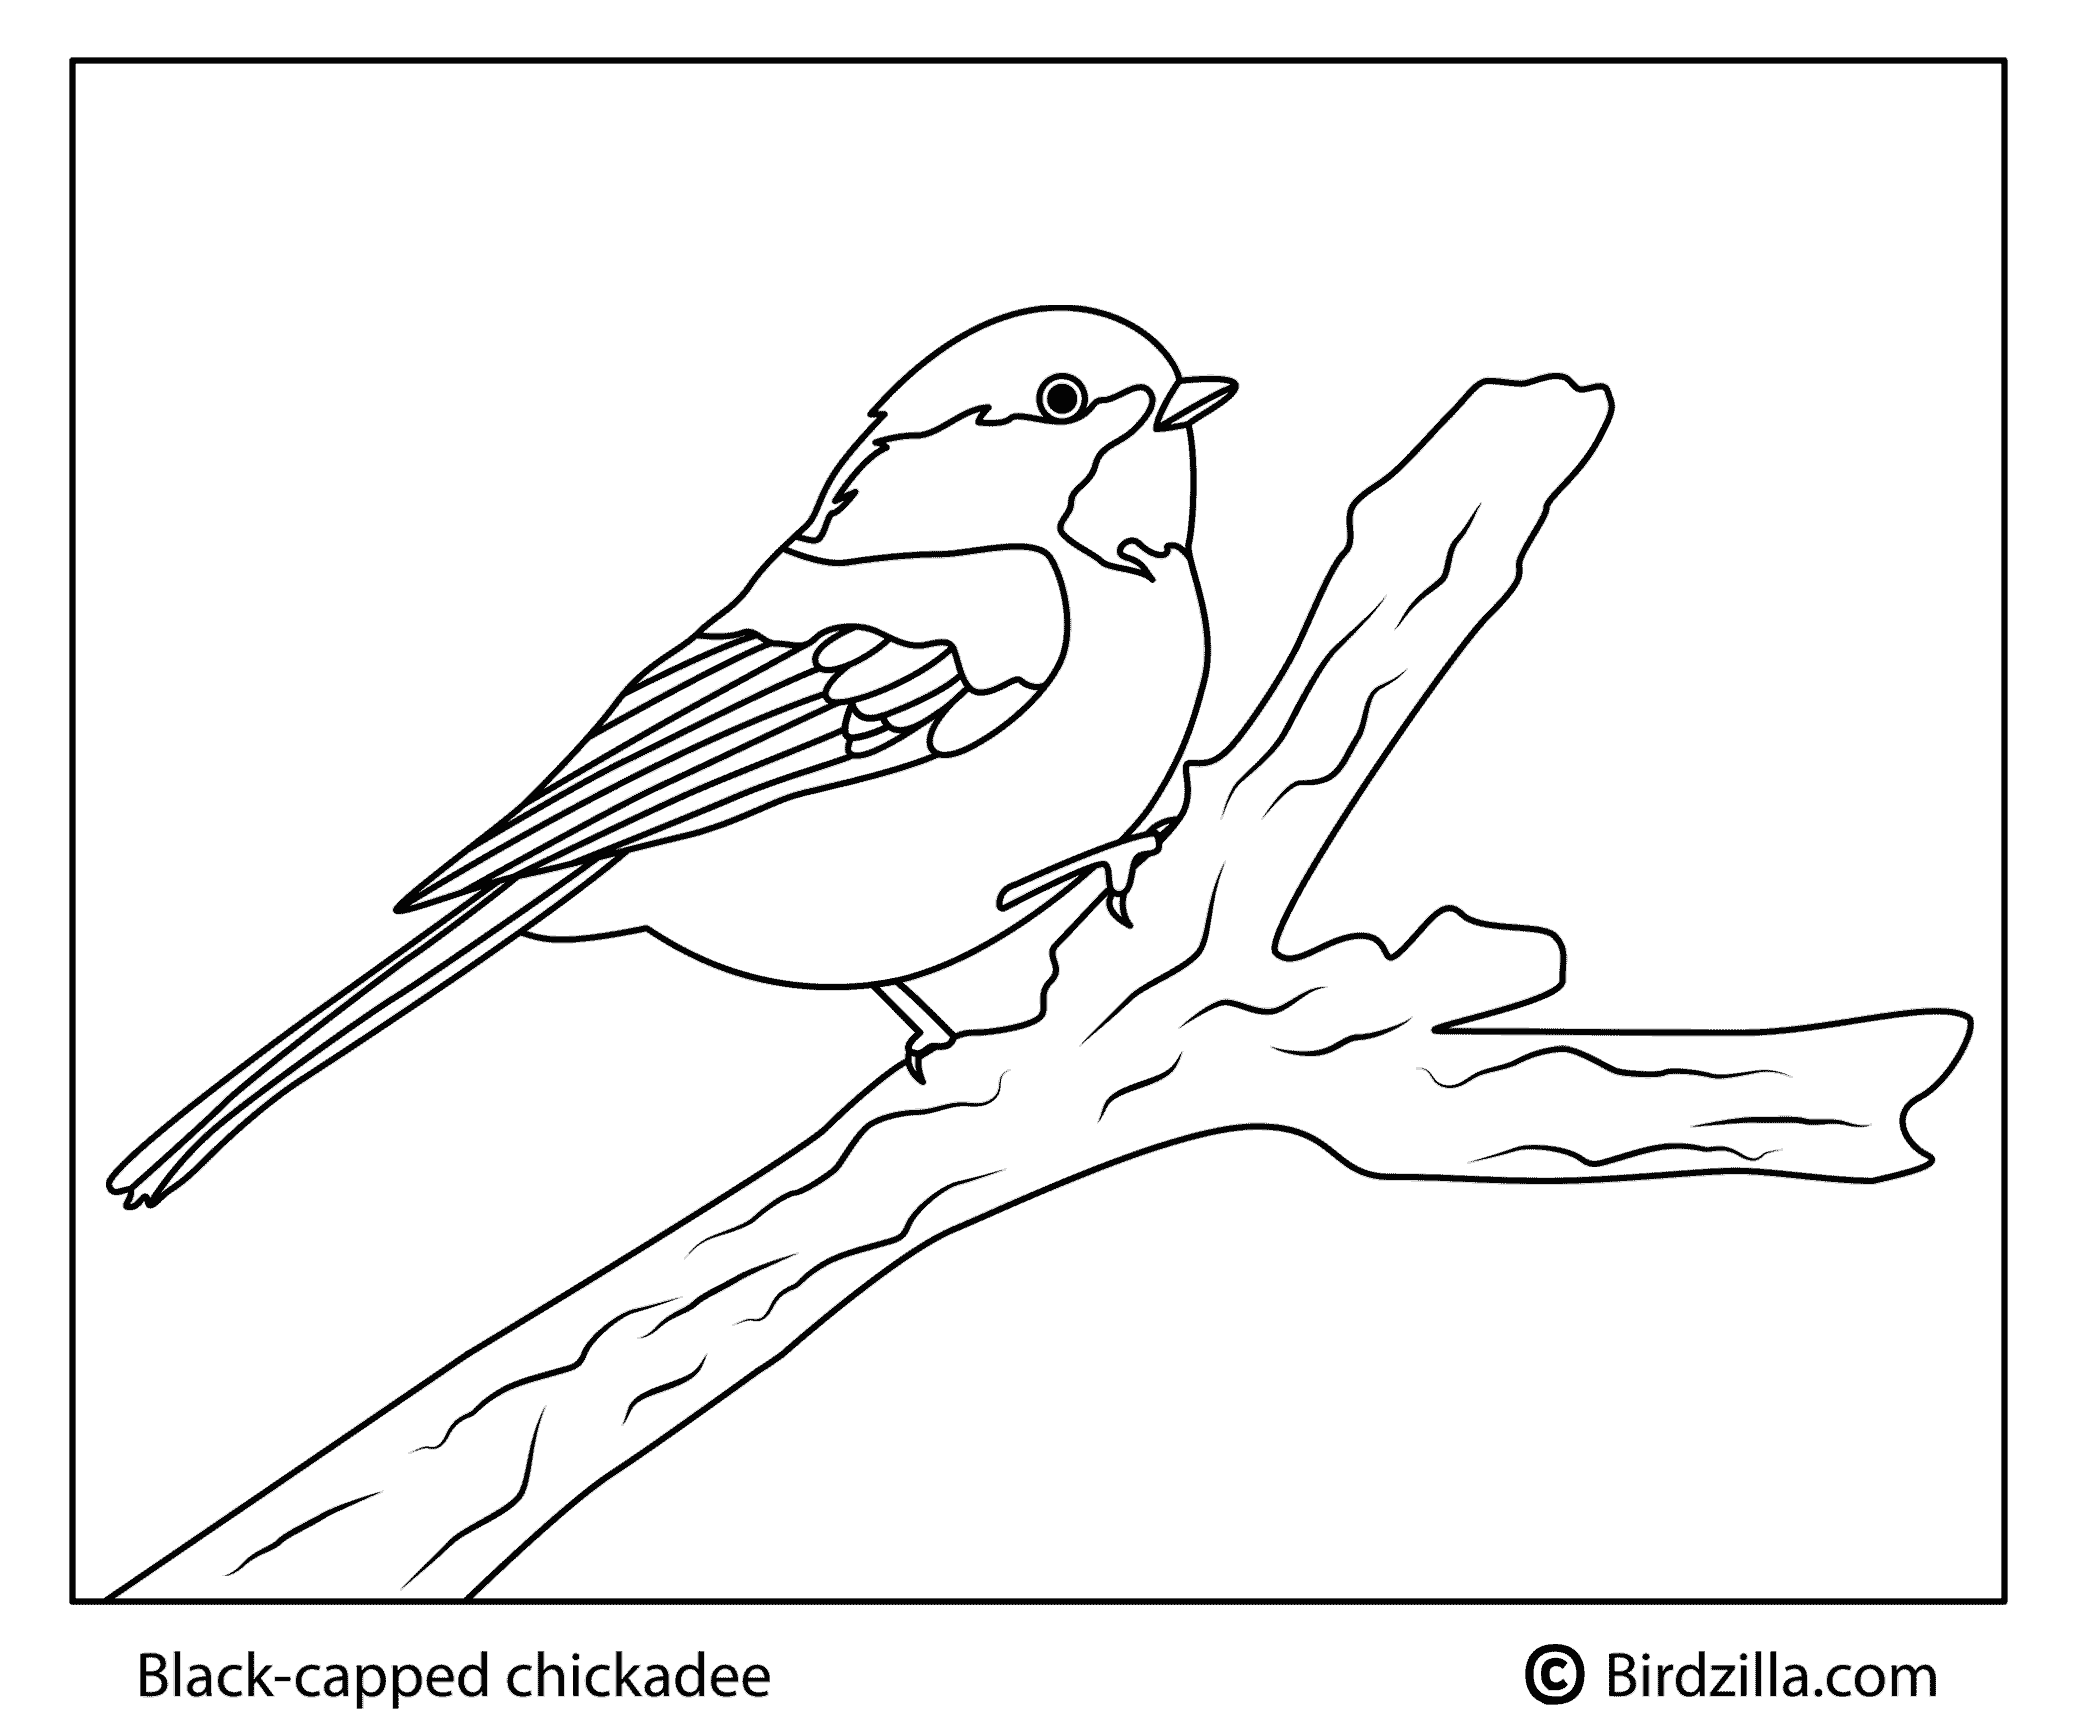 Black-Capped-Chickadee coloring page